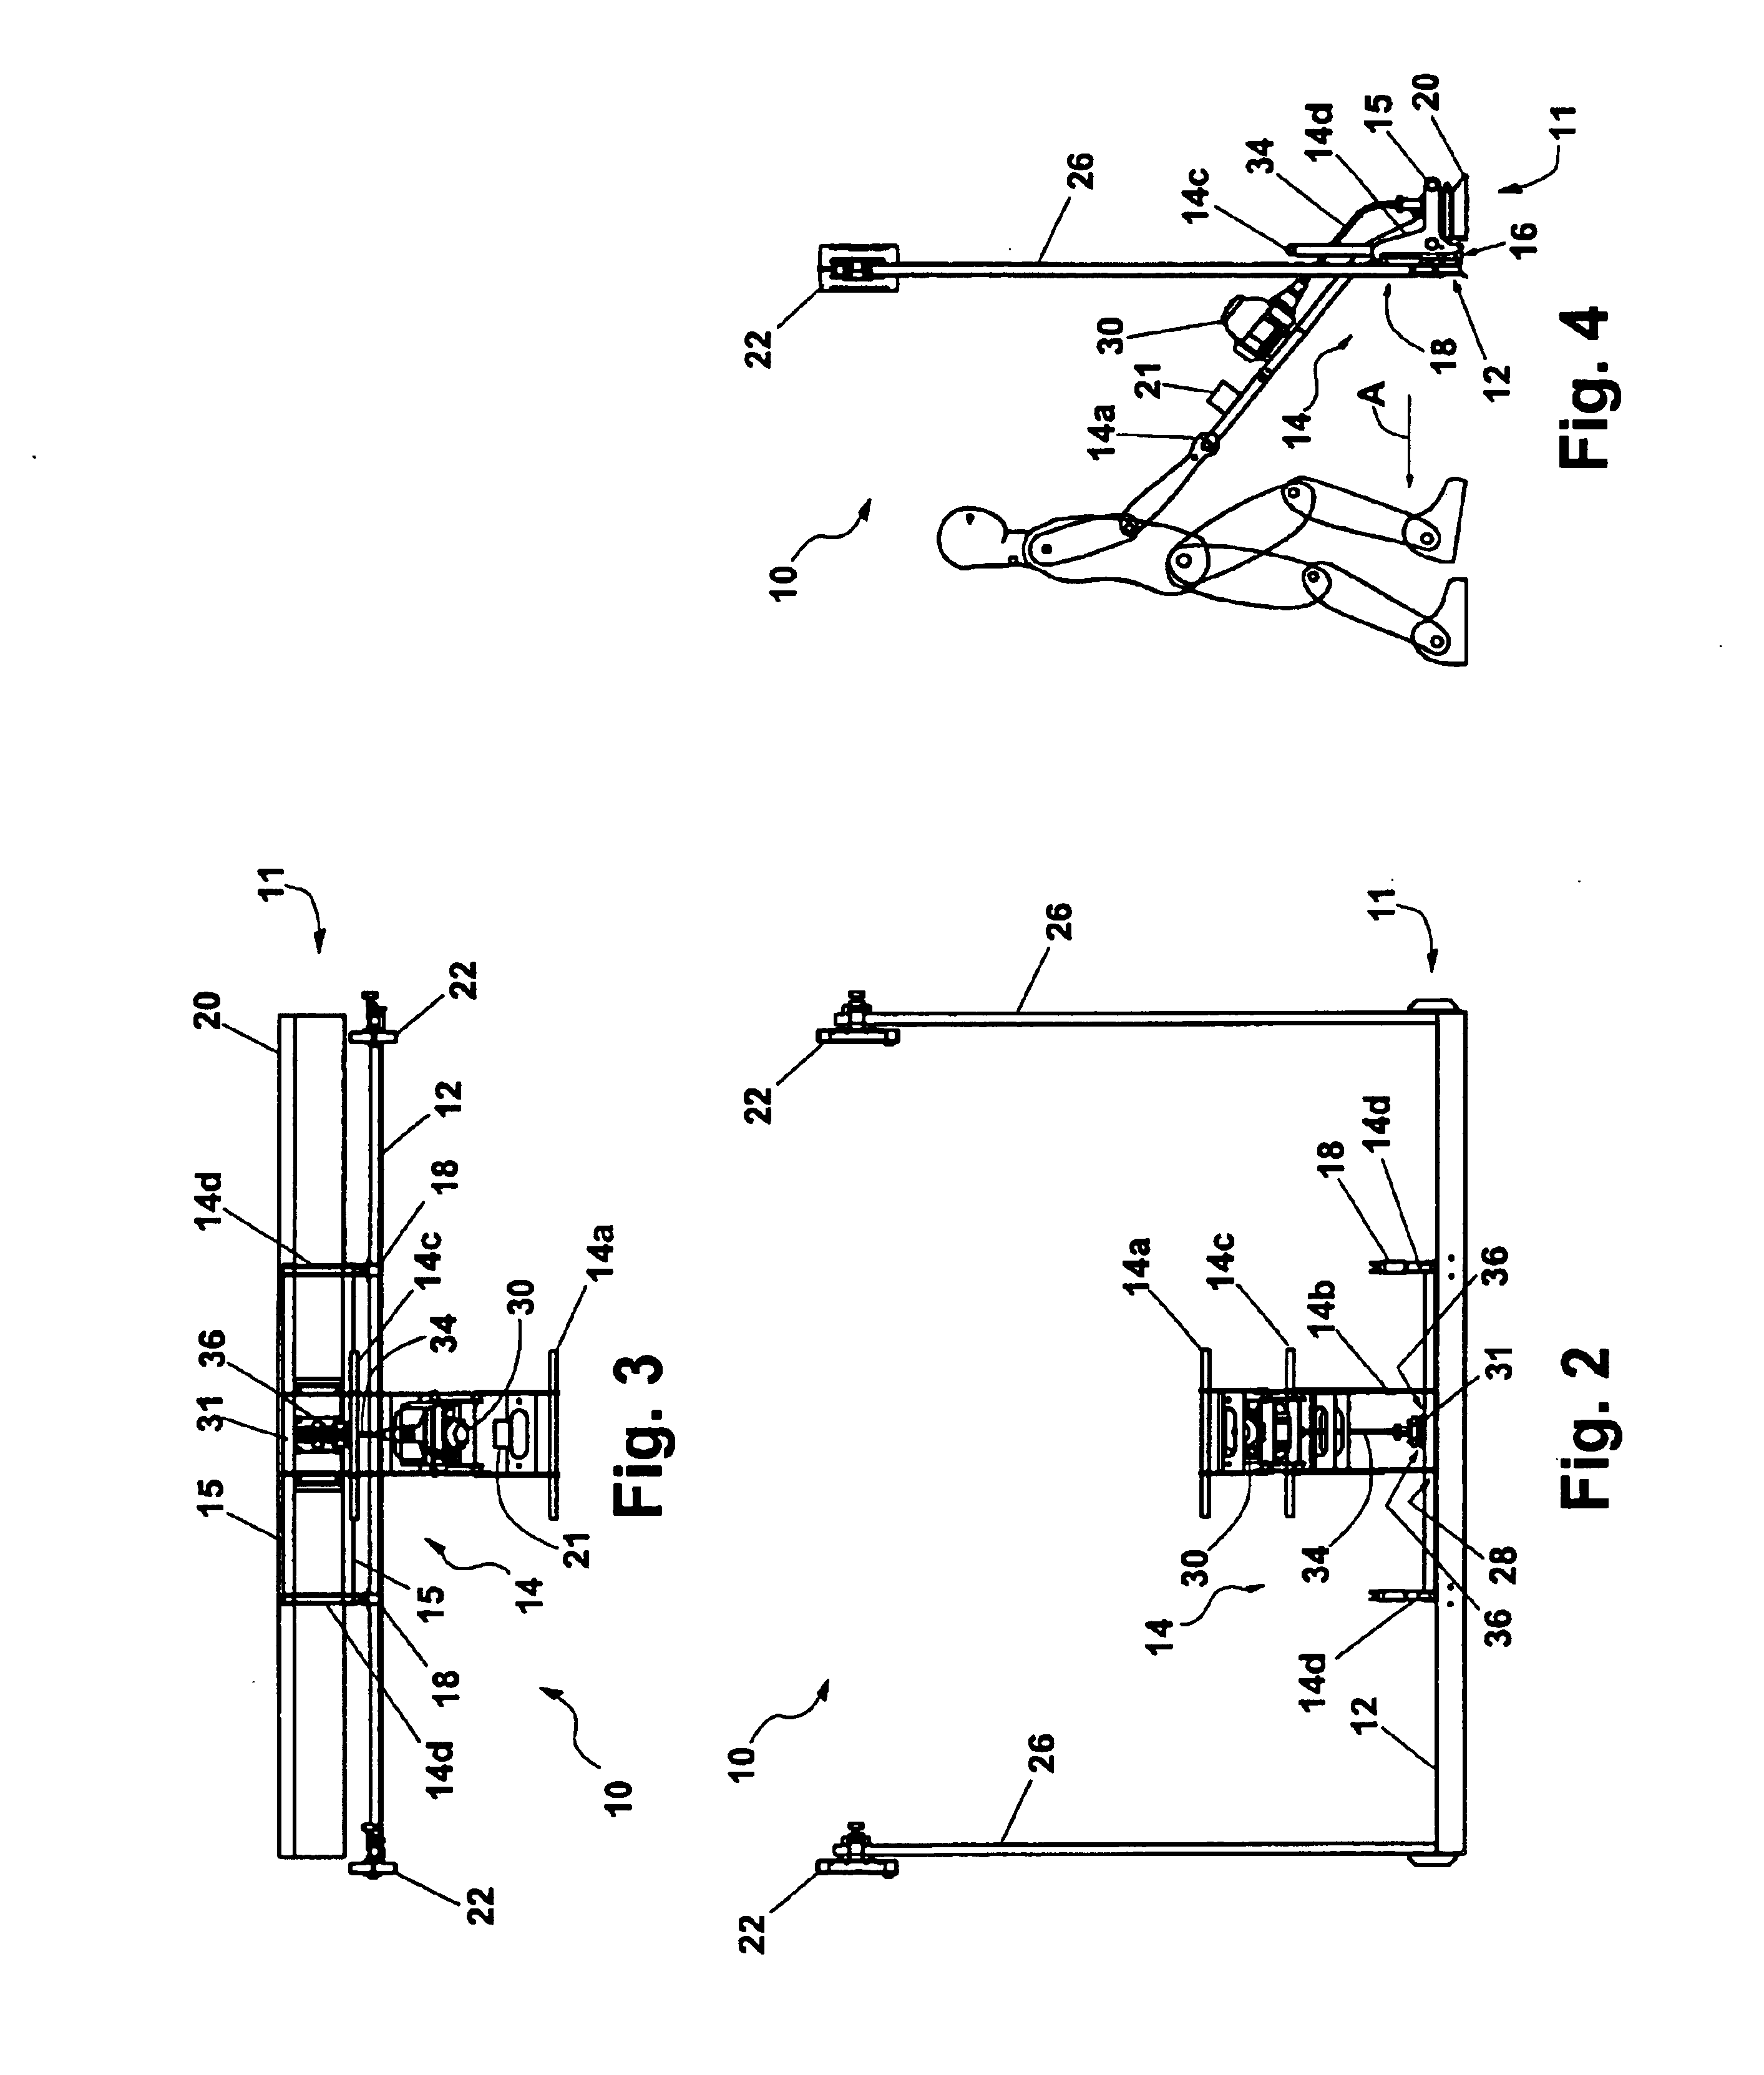 Light weight apparatus for screeding and vibrating uncured concrete surfaces